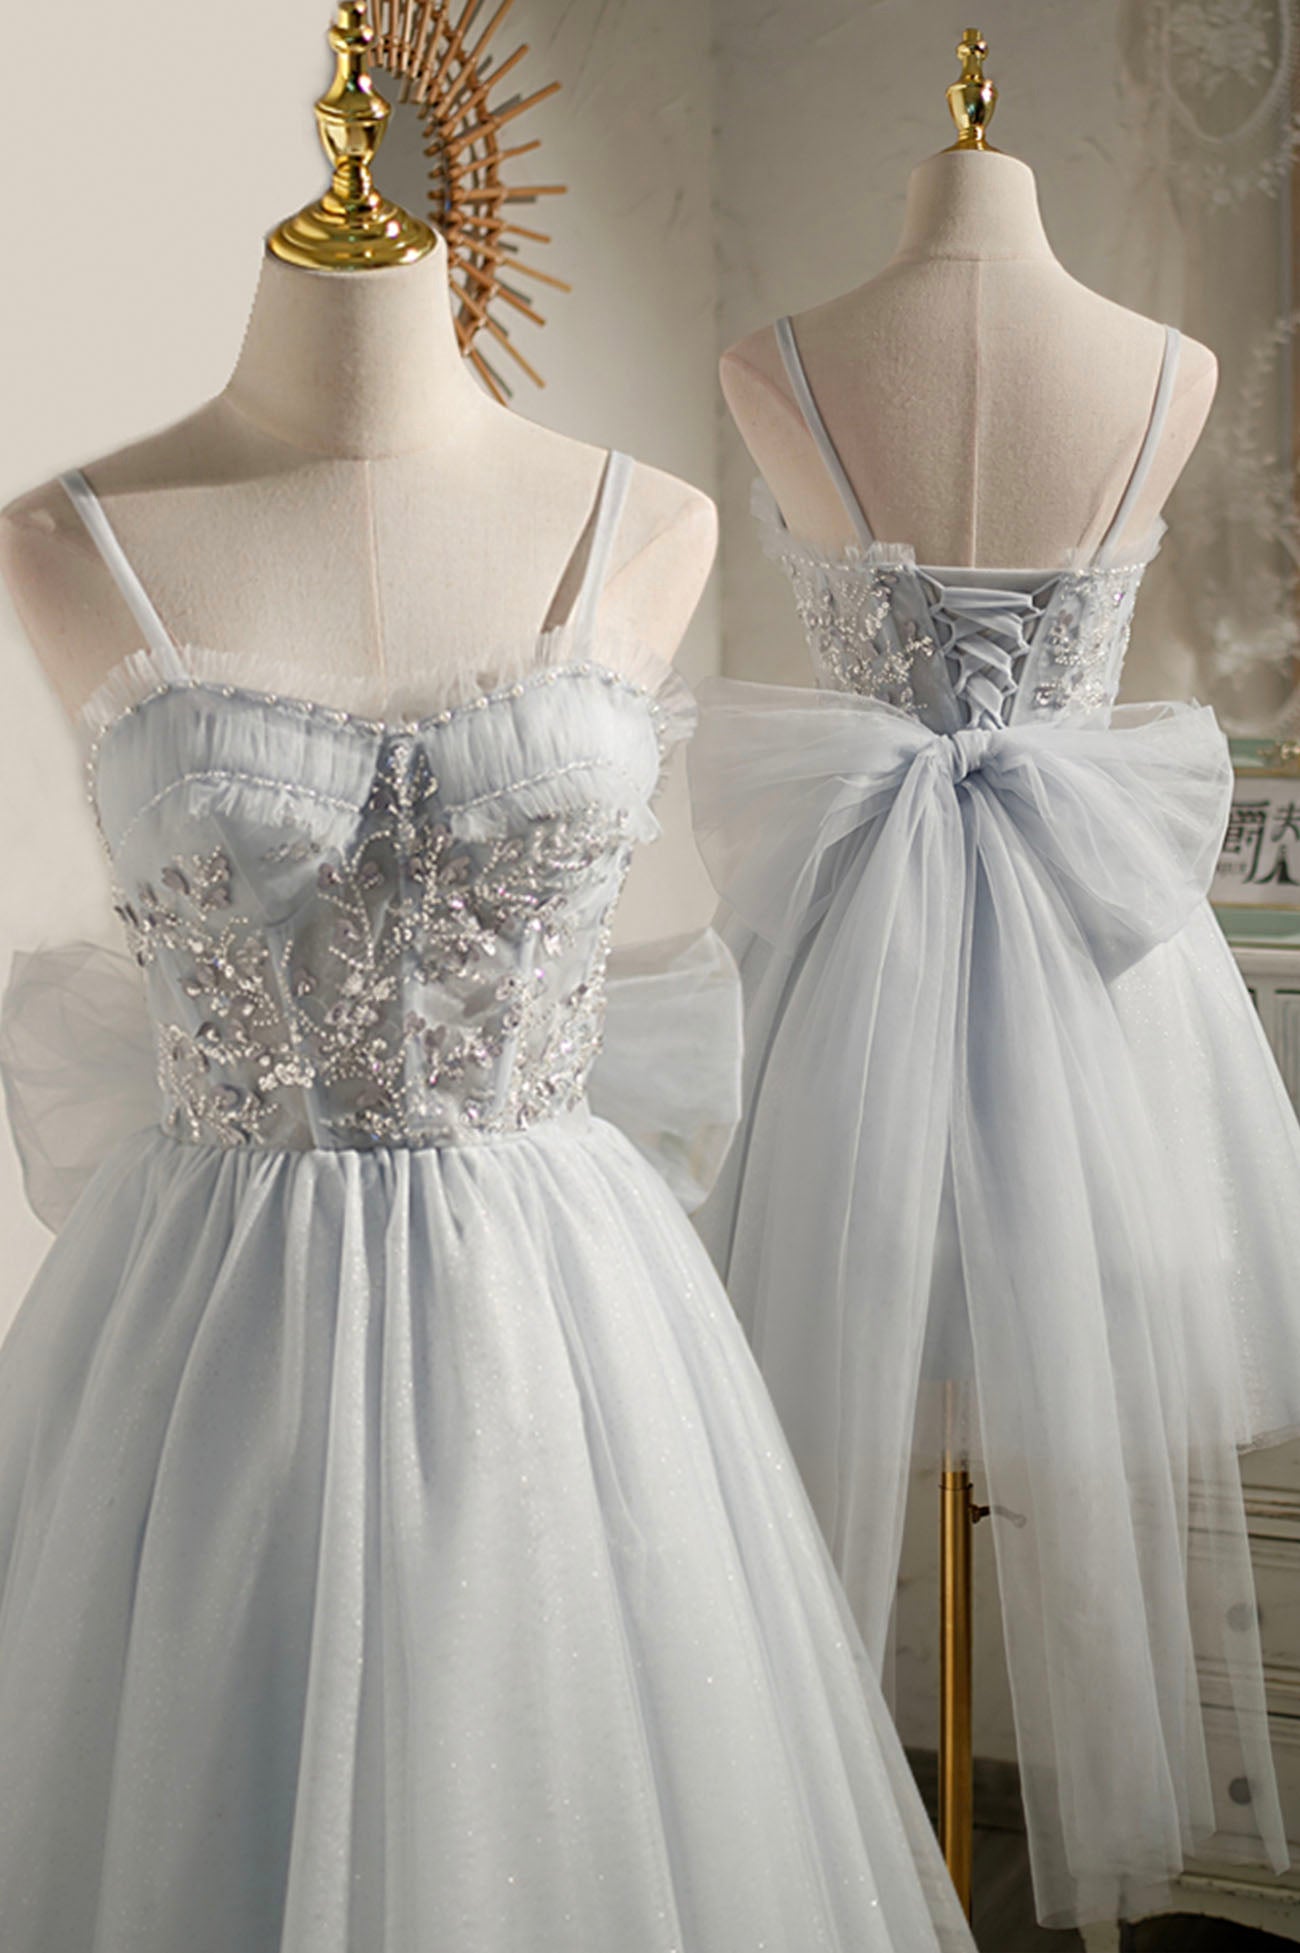 Gray Tulle Short A-Line Prom Dress, Cute Evening Party Dress